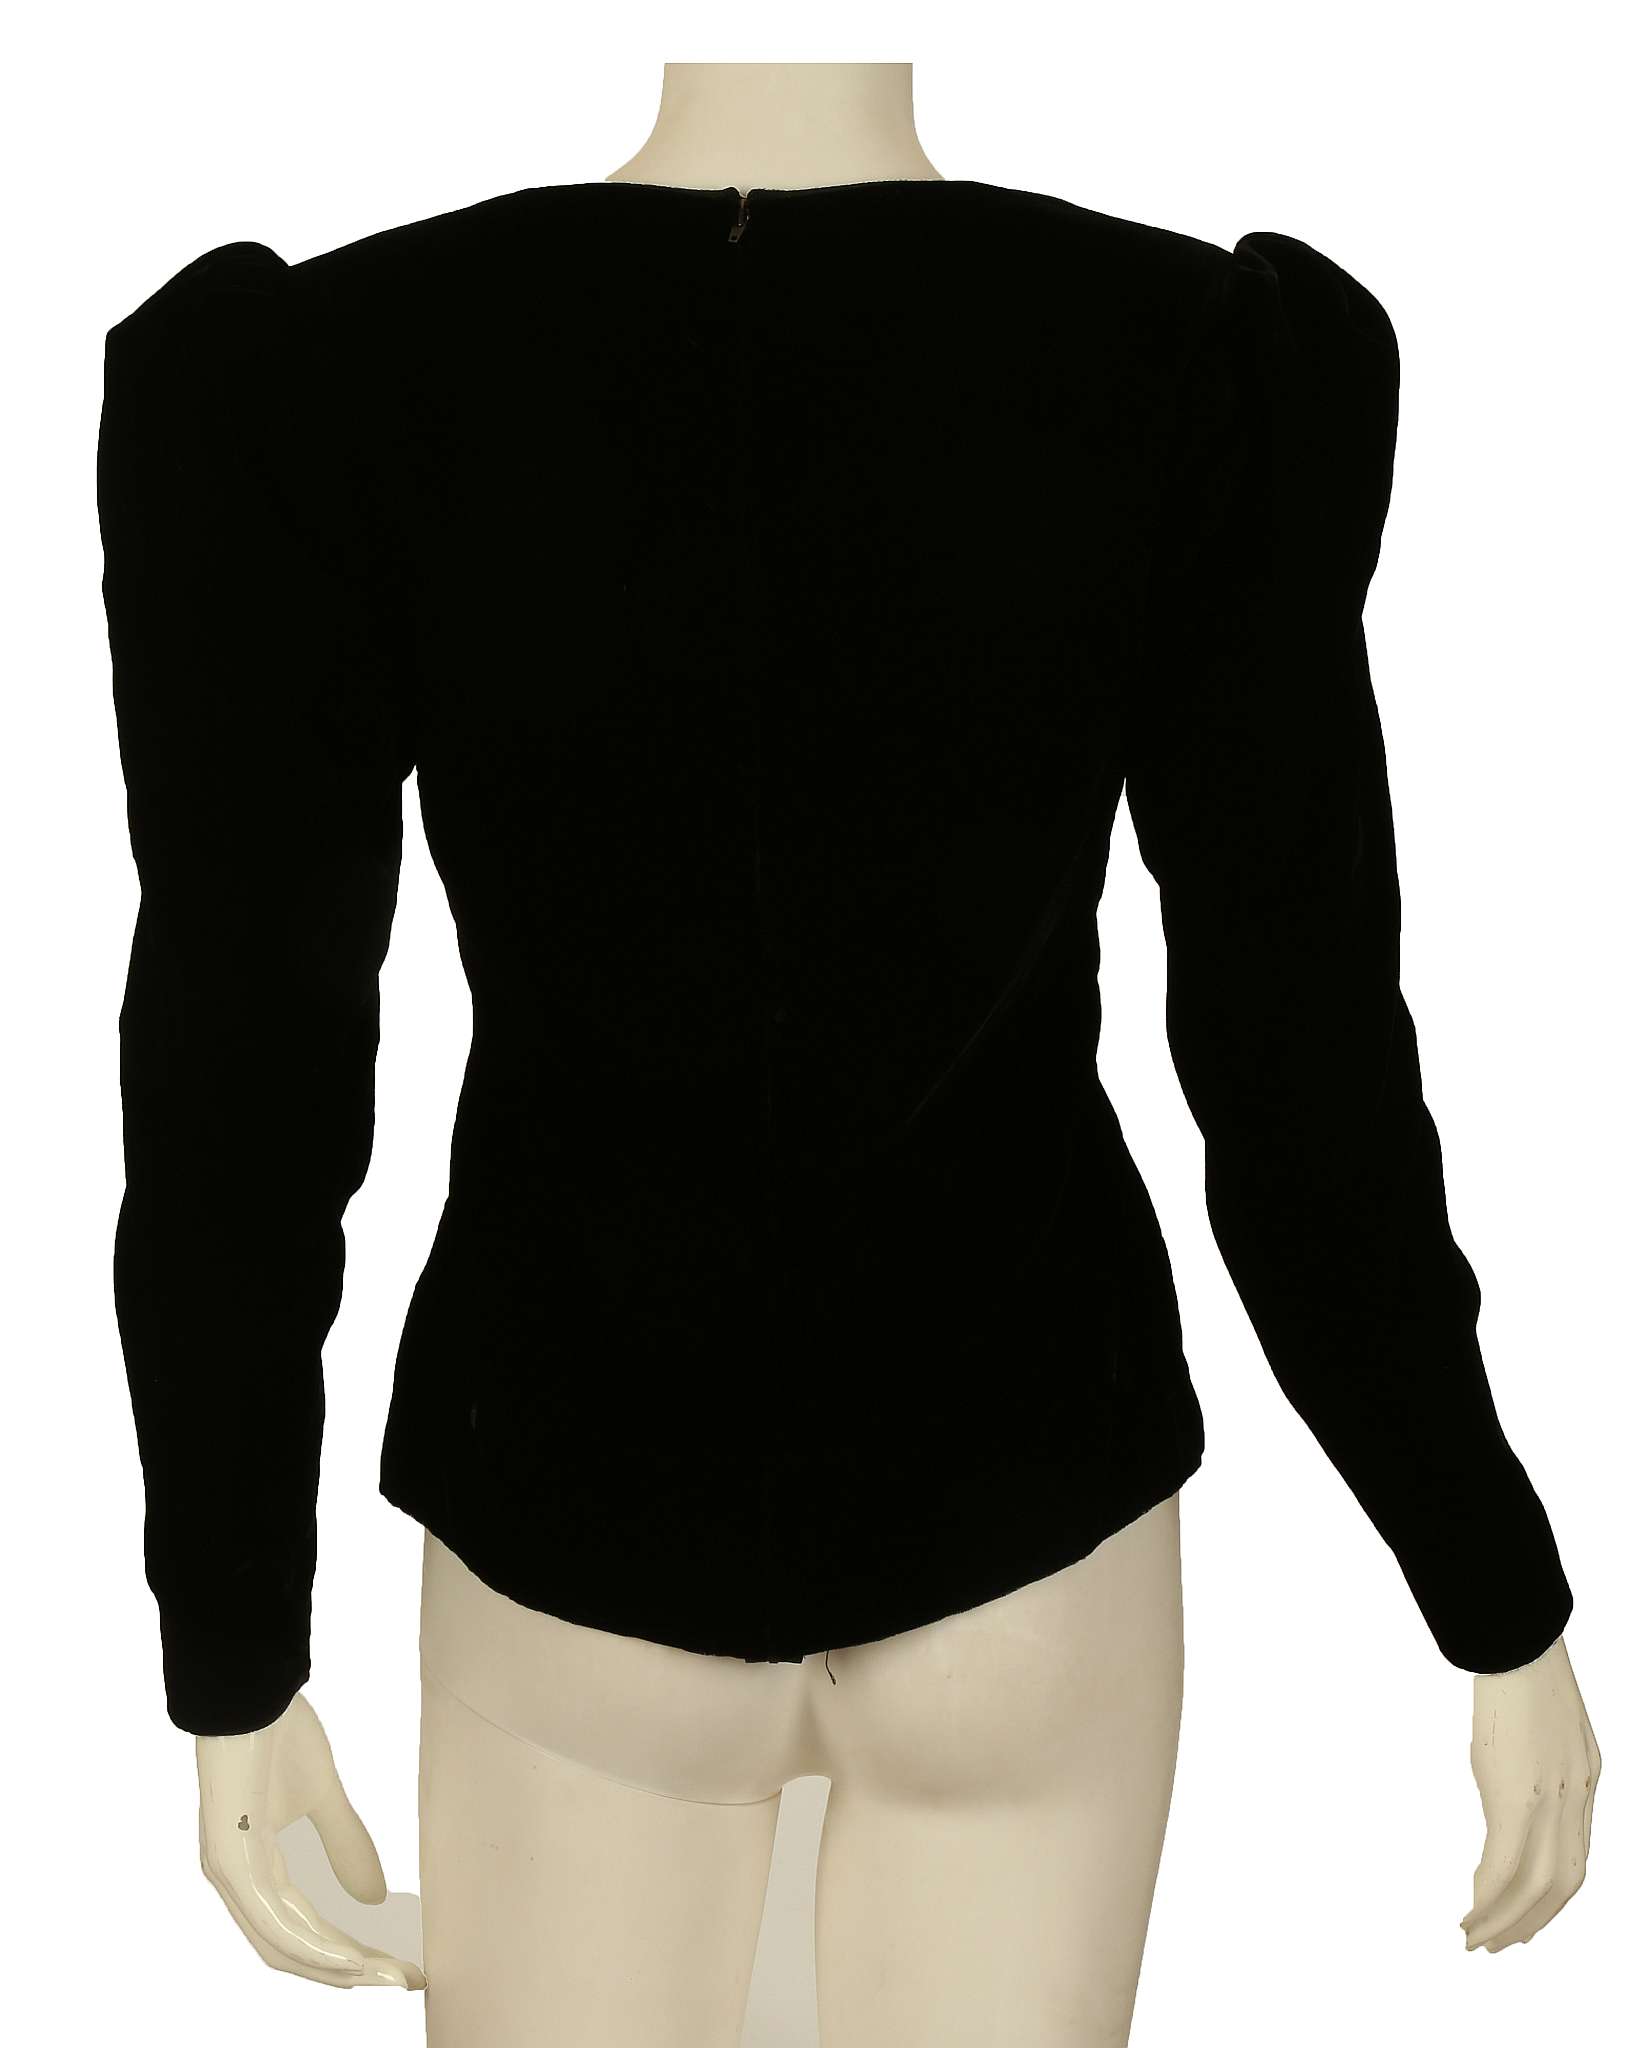 YVES SAINT LAURENT COUTURE BLACK VELVET TOP, 1960s, sweetheart neckline and long sleeves, numbered - Image 4 of 5